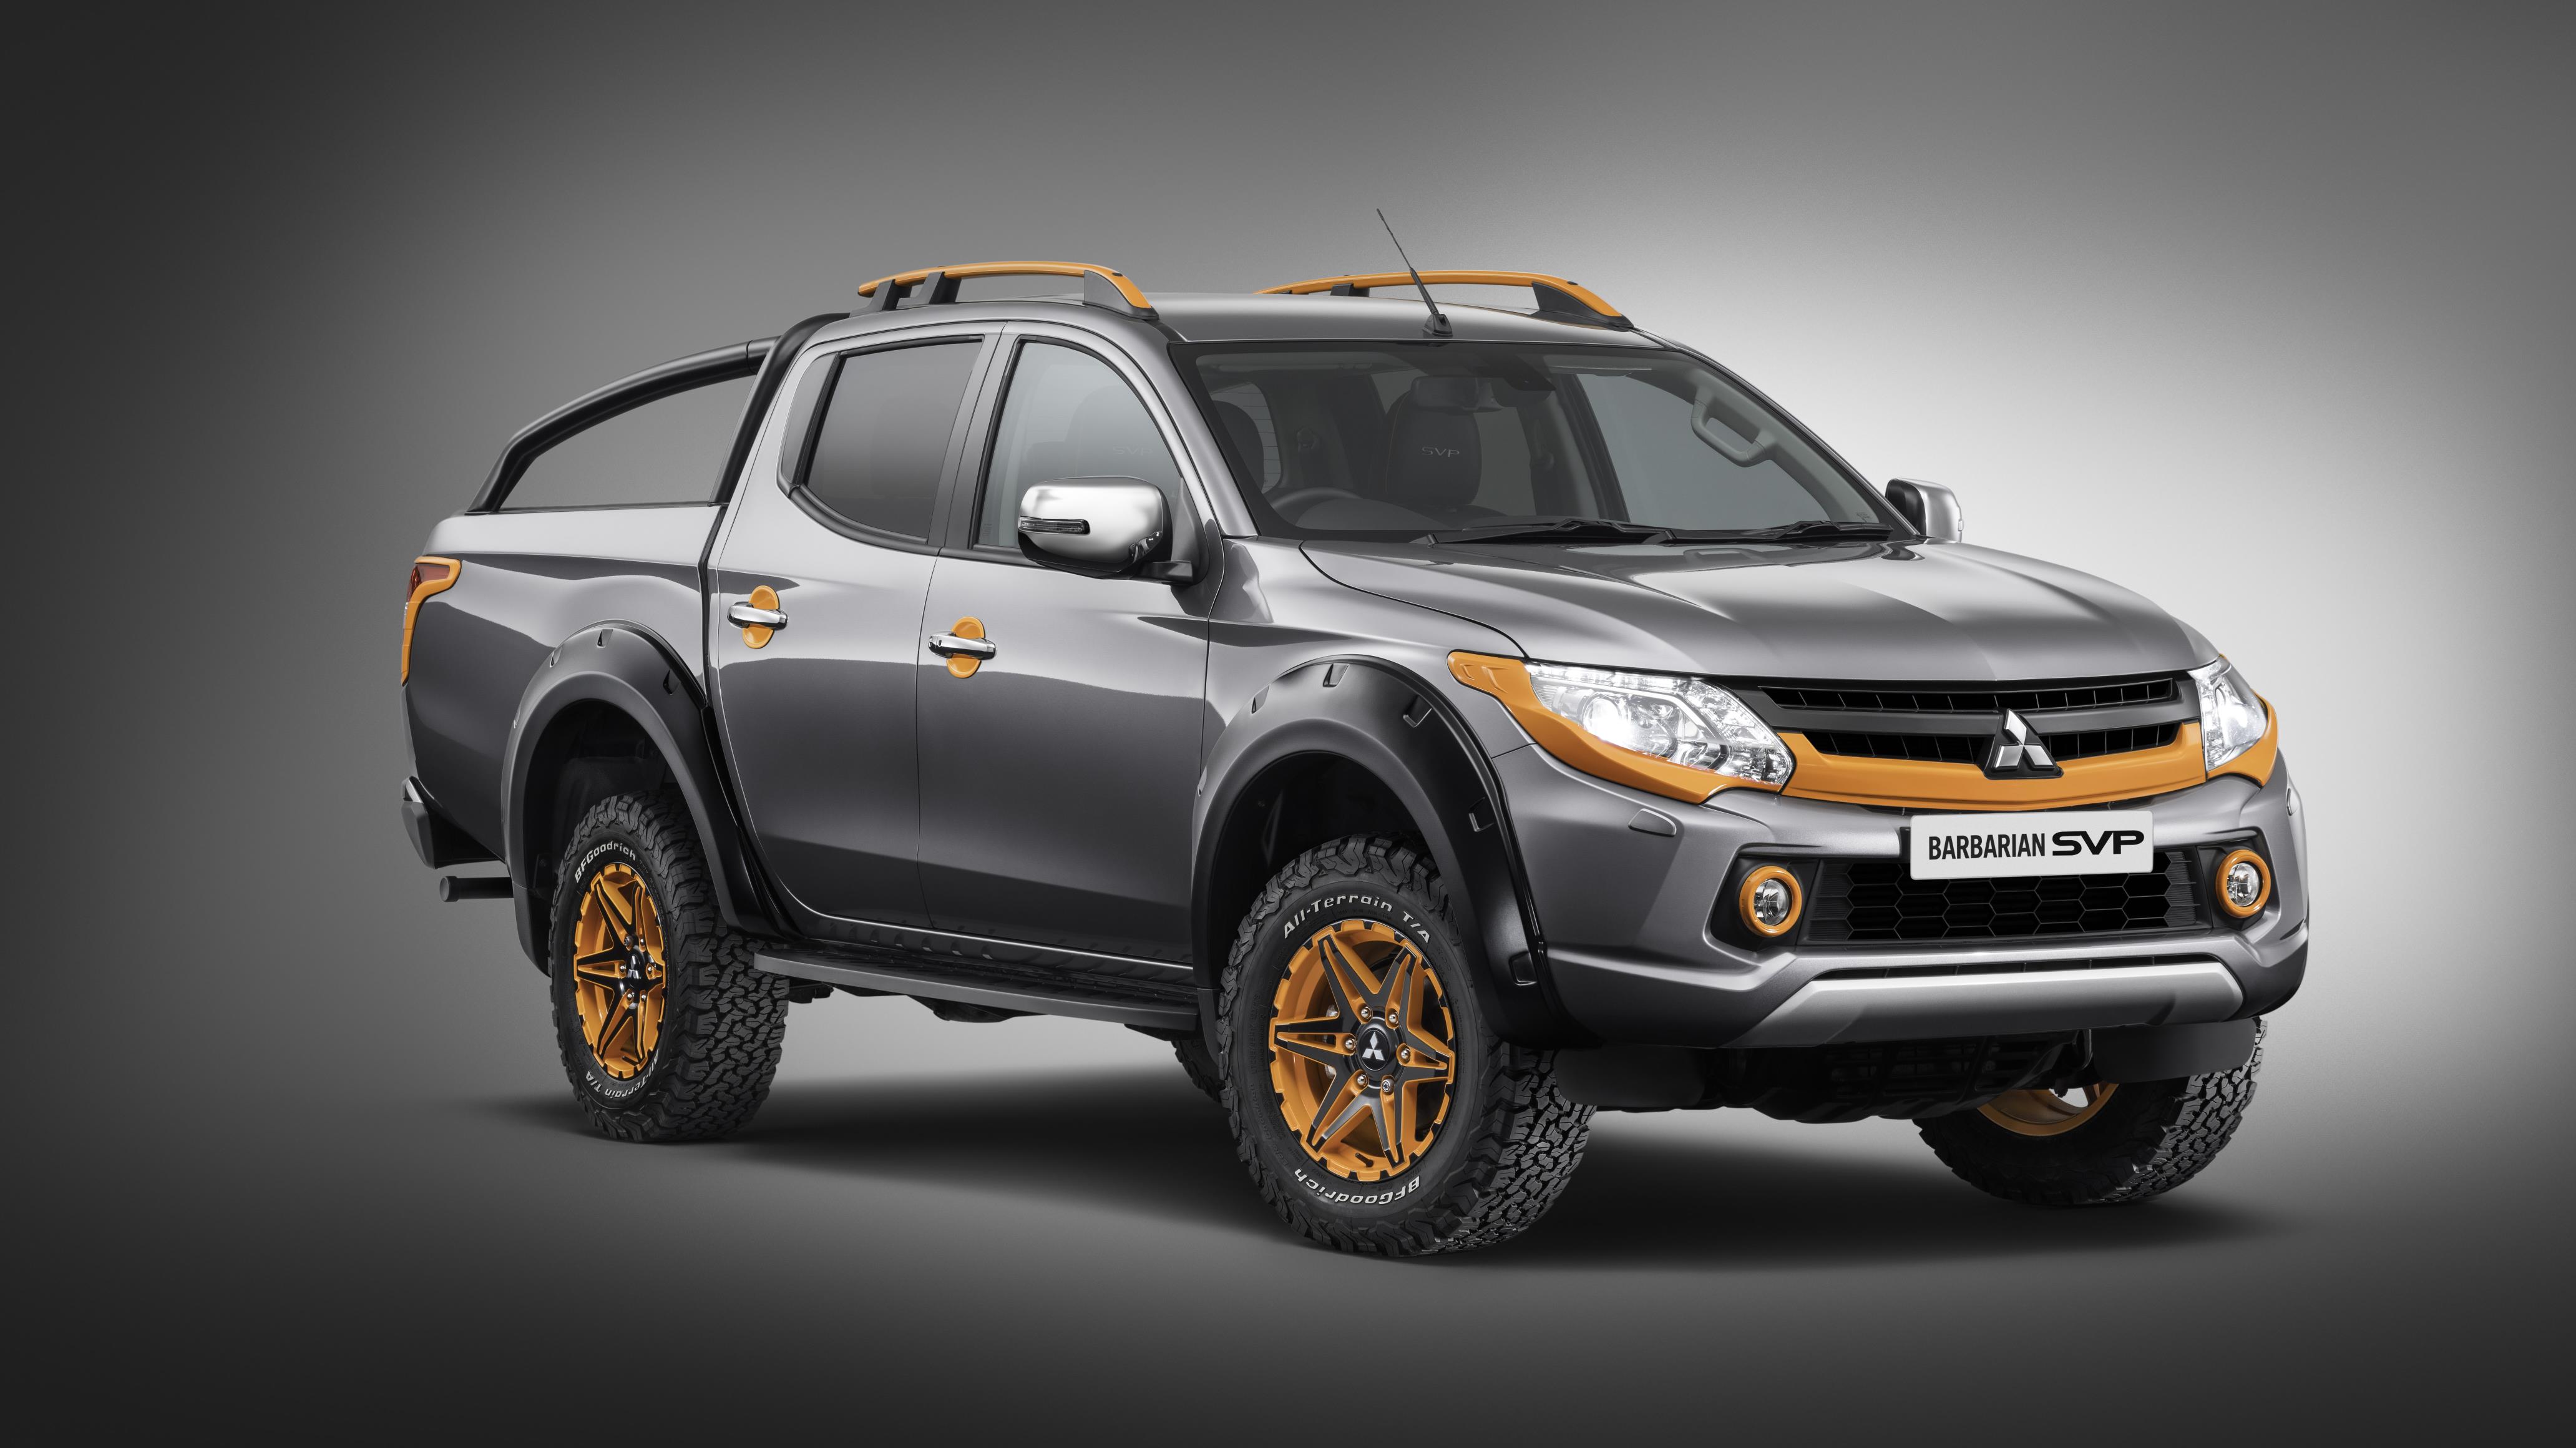 The L200 is a rugged pick-up truck